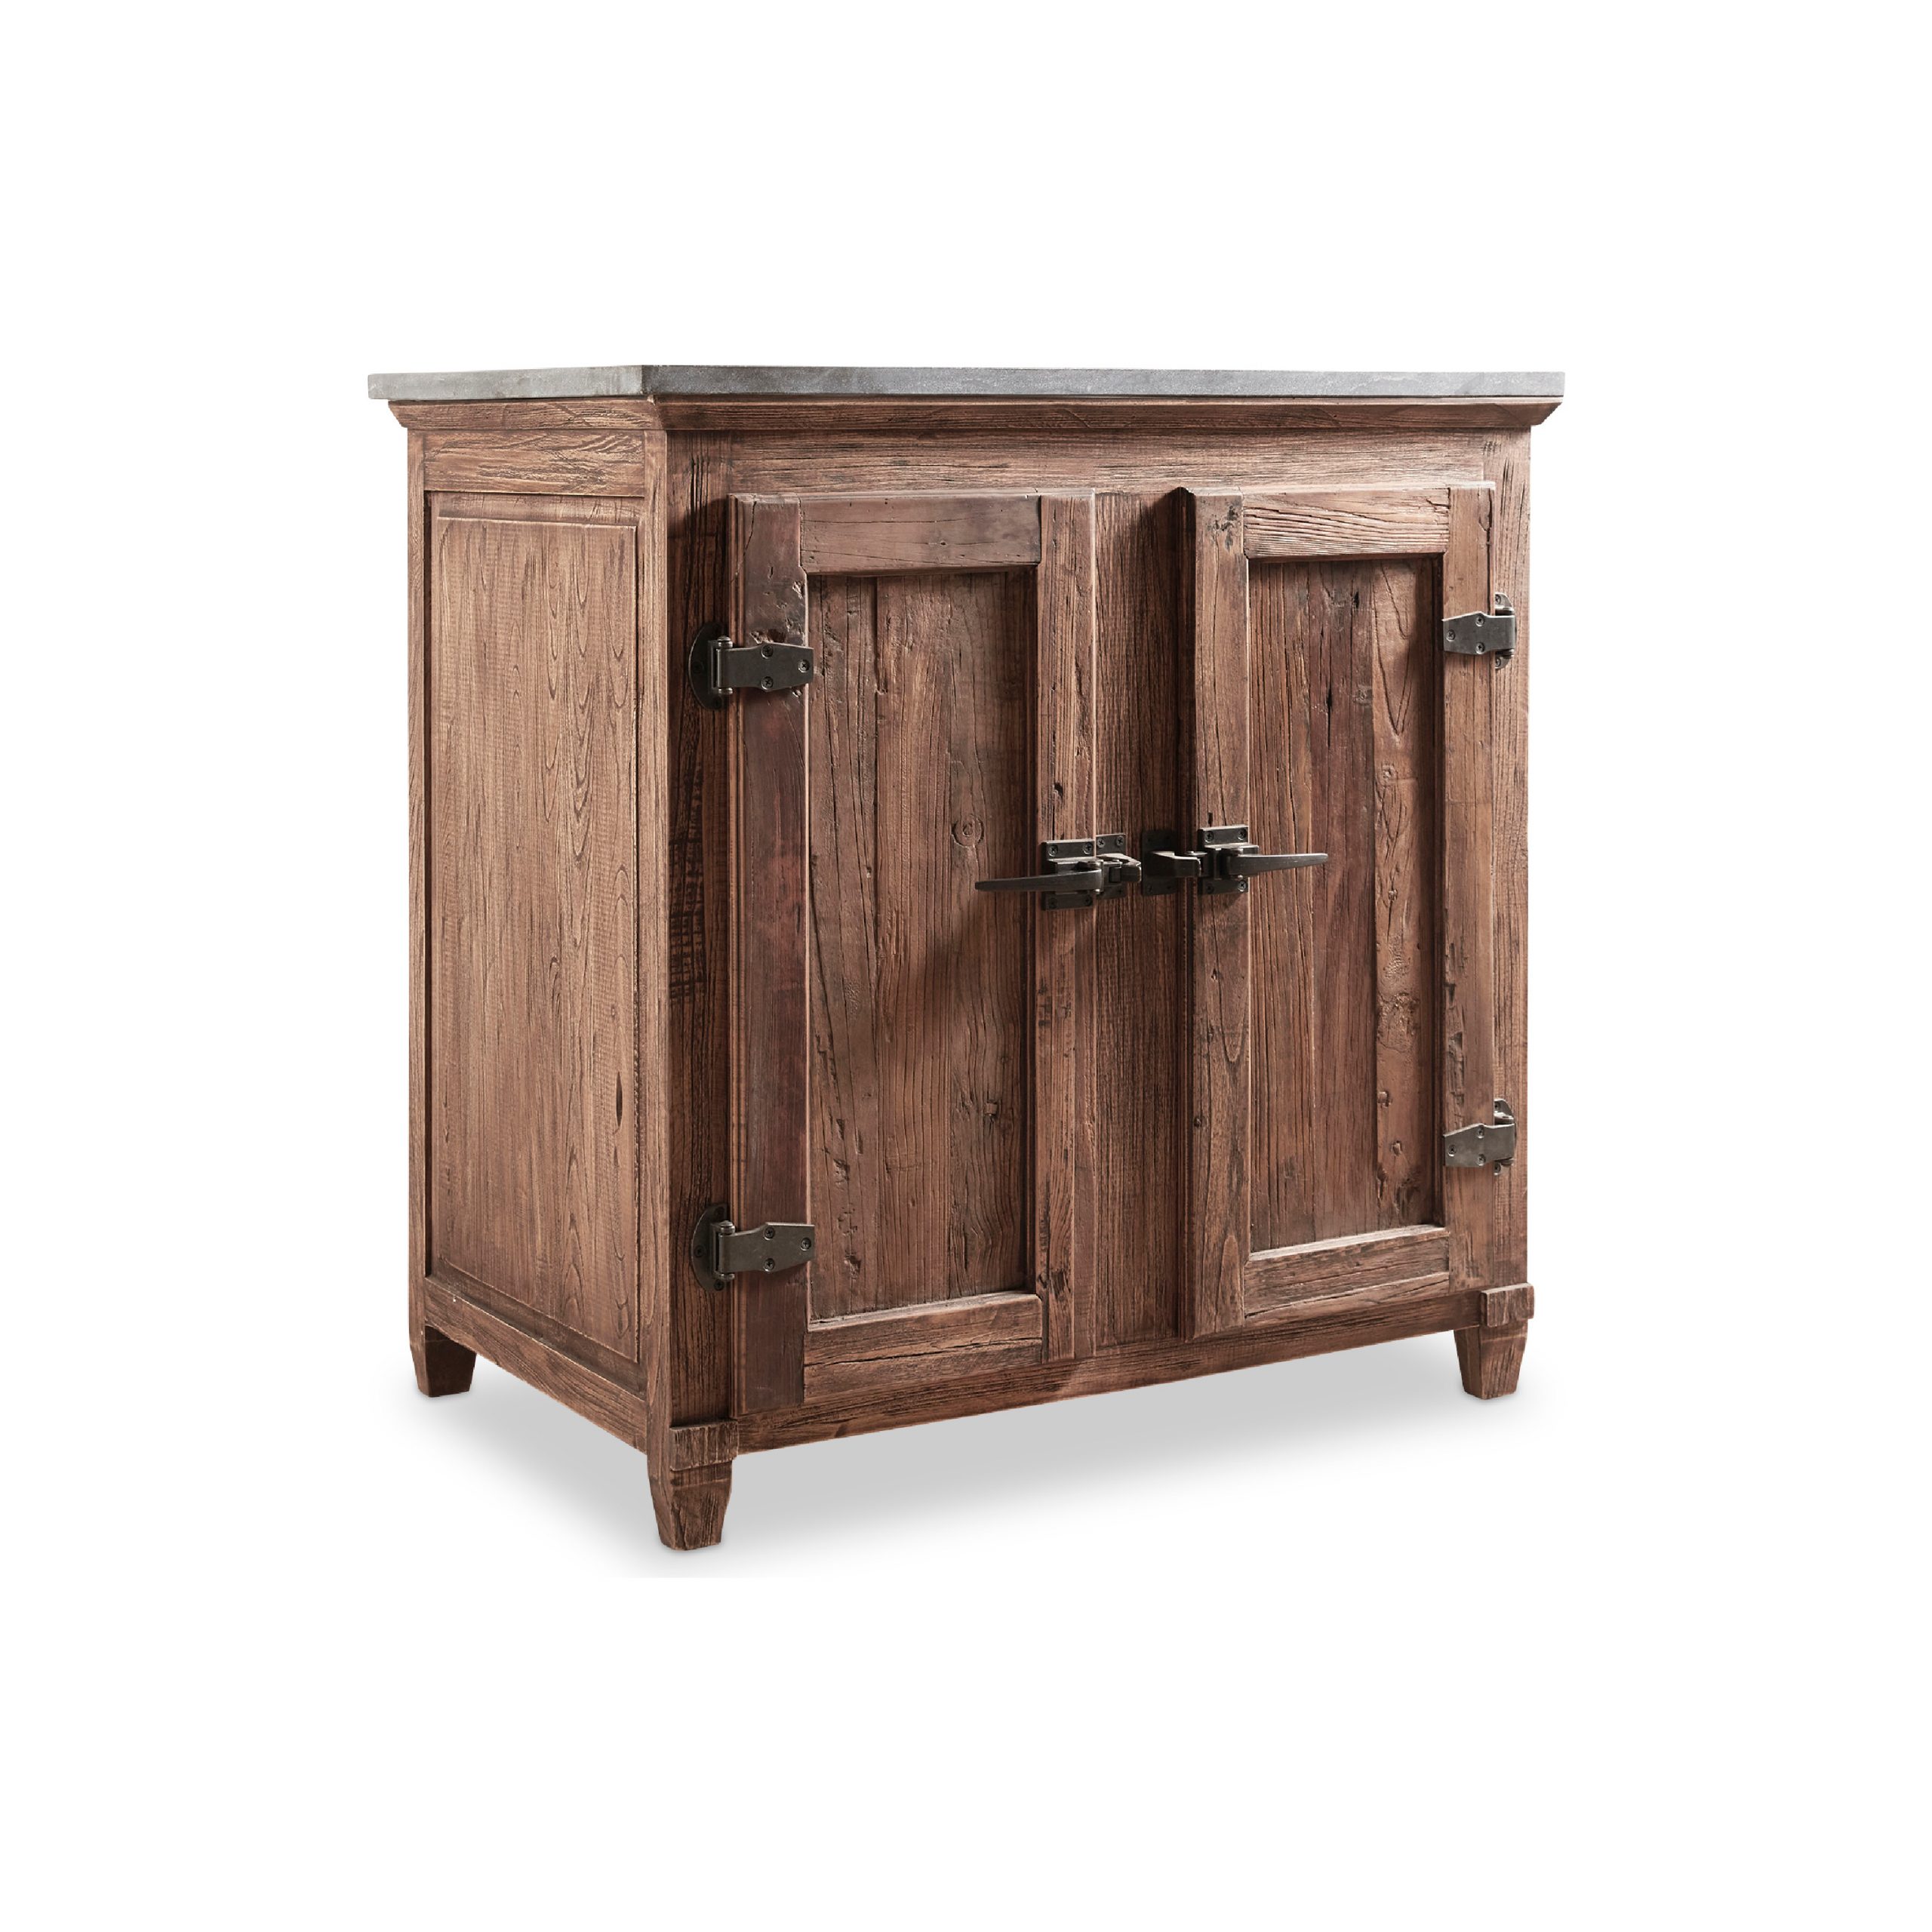 36" Handcrafted Reclaimed Elm Solid Wood Single Bath Vanity Natural Finish